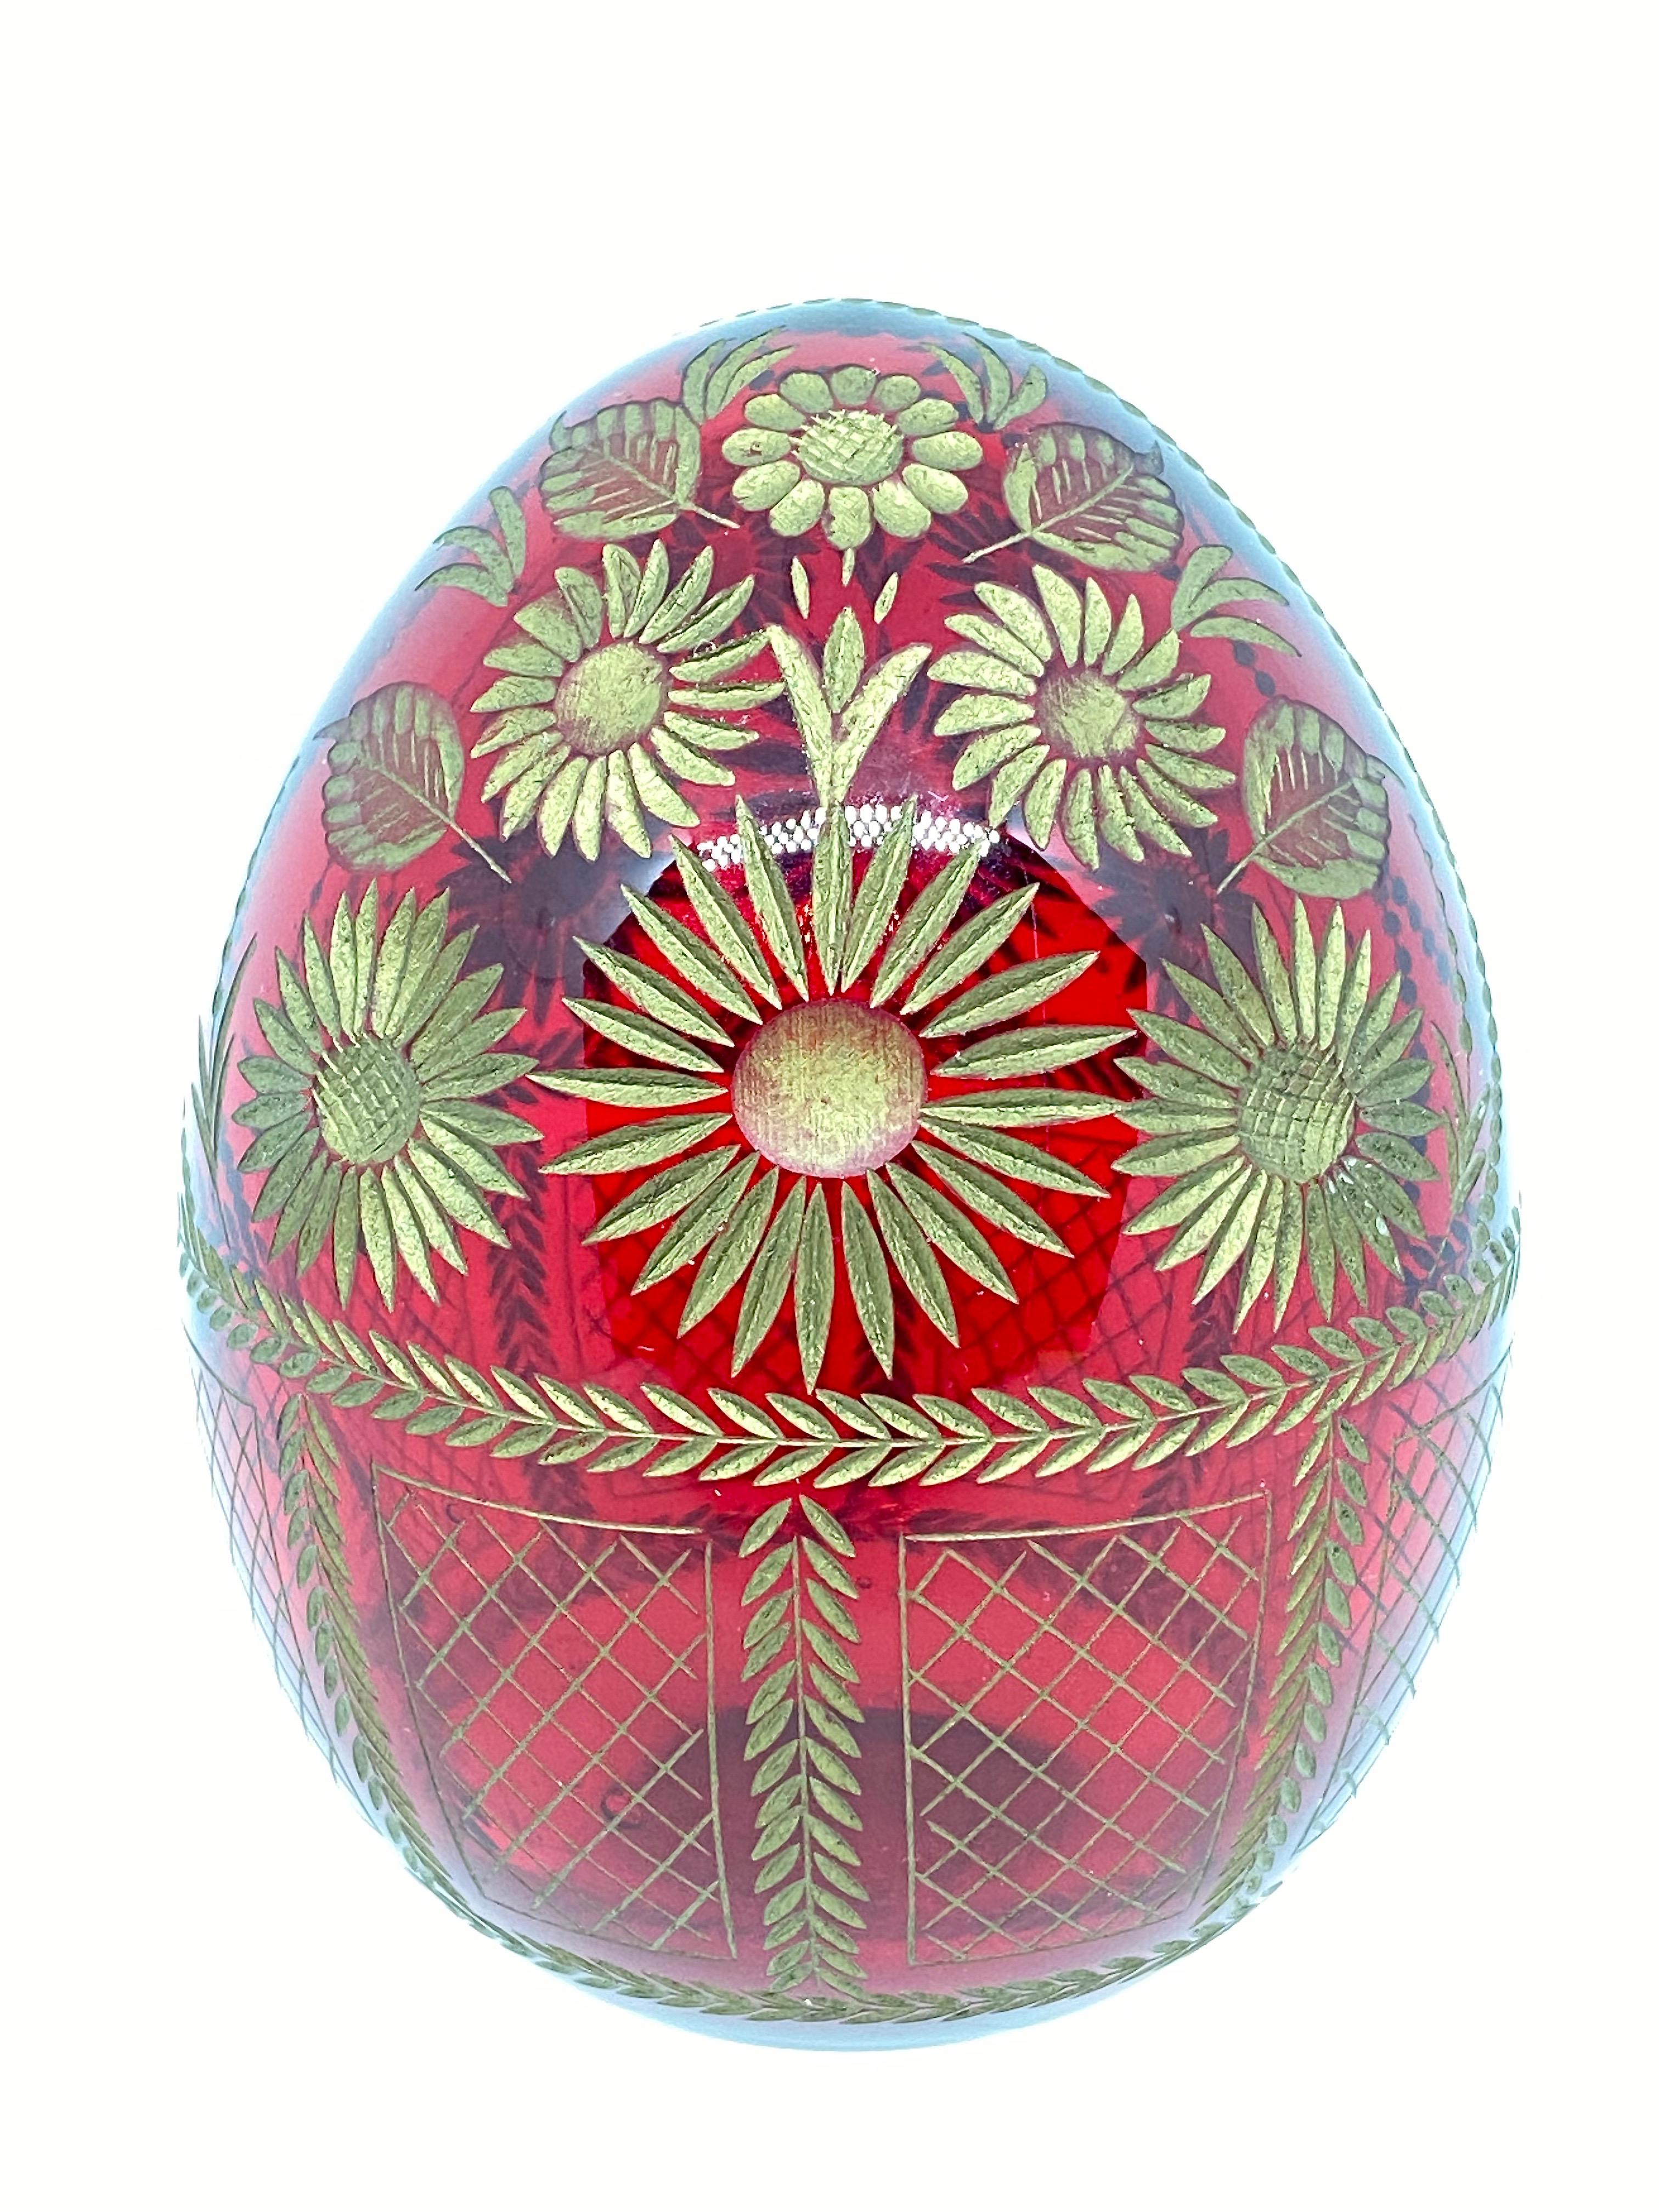 Vintage Faberge Russia style glass egg with etched Russian Folk Art Flowers. Reminiscent of eggs from St. Petersburg. Nice addition to your collection or just as decorative piece.